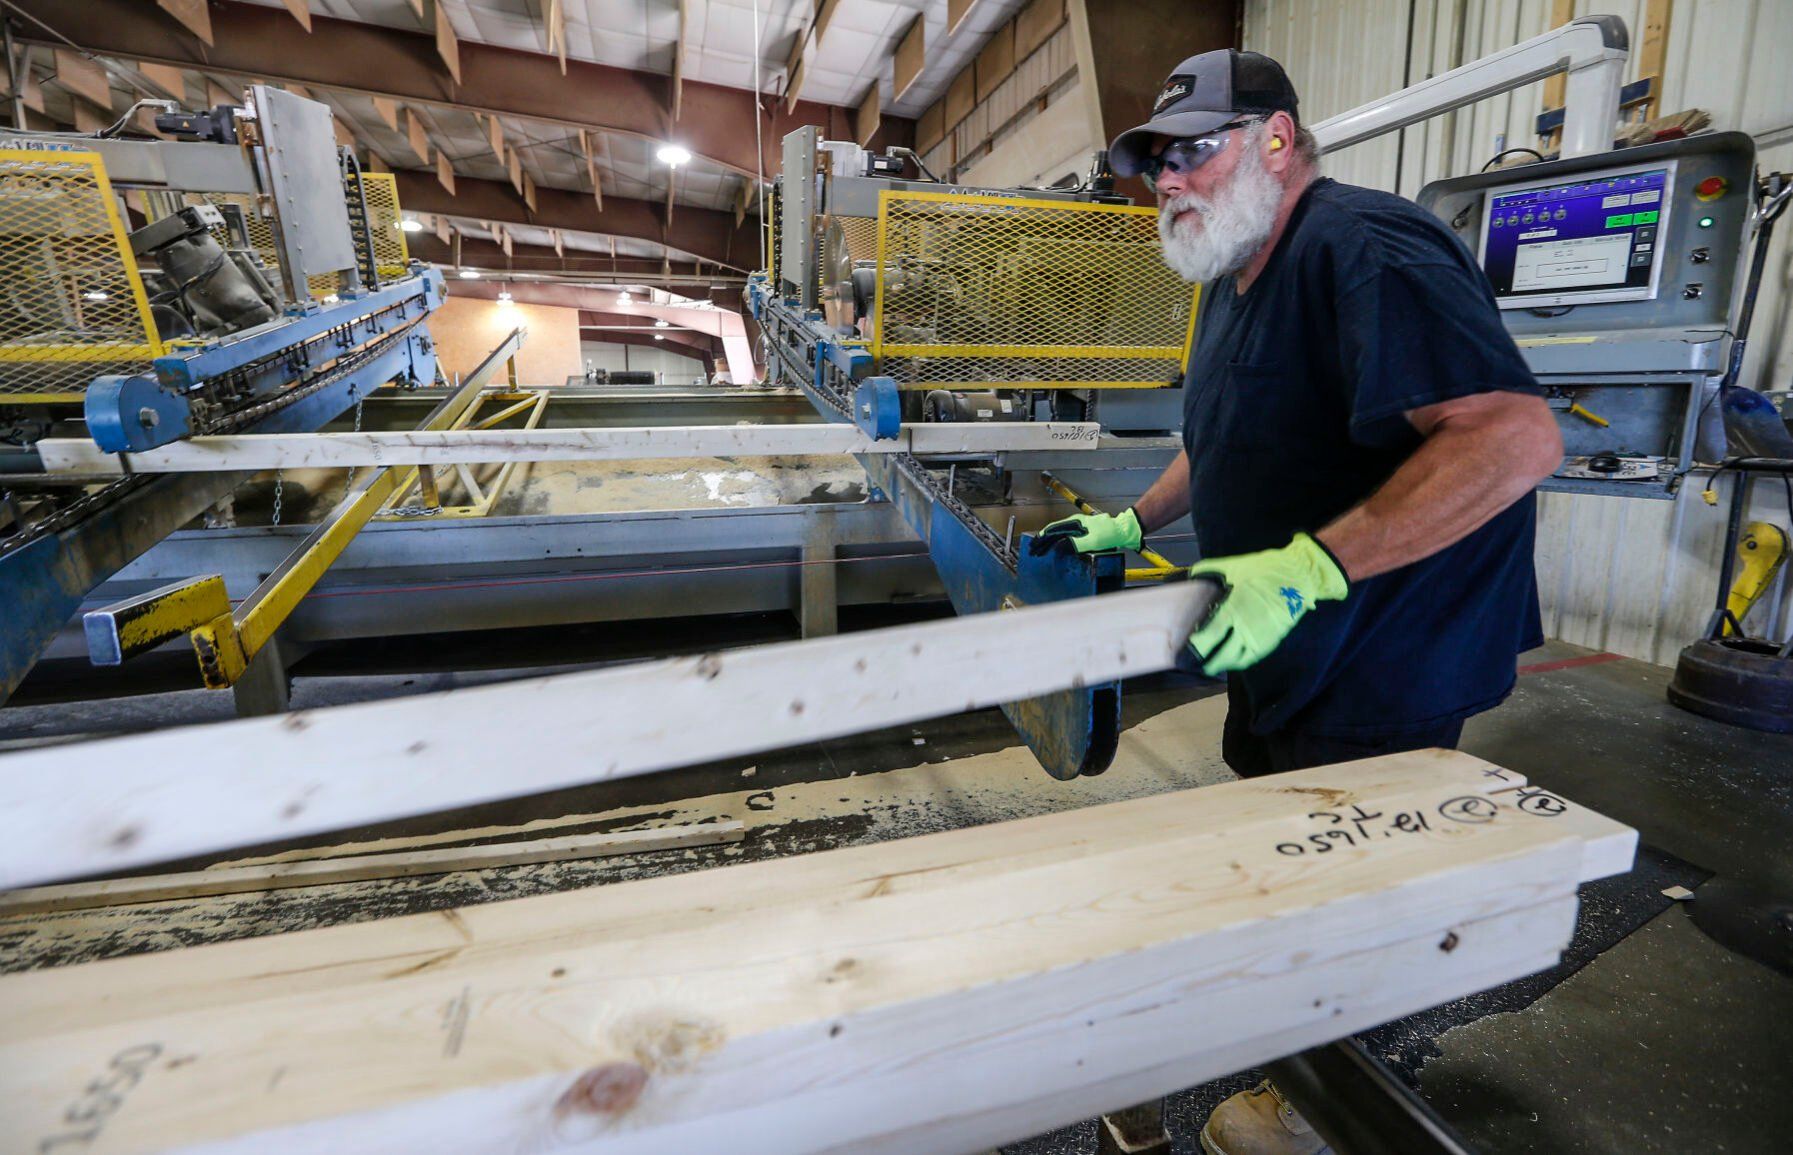 Tom Wall works at Cascade Lumber Co. The Iowa business, founded in 1953 by Ray Noonan Sr., started as a lumber yard. Through the years, it expanded its building supply inventory, then moved into manufacturing trusses. Today, it has several Iowa offices and another in Tyler, Texas.    PHOTO CREDIT: Dave Kettering